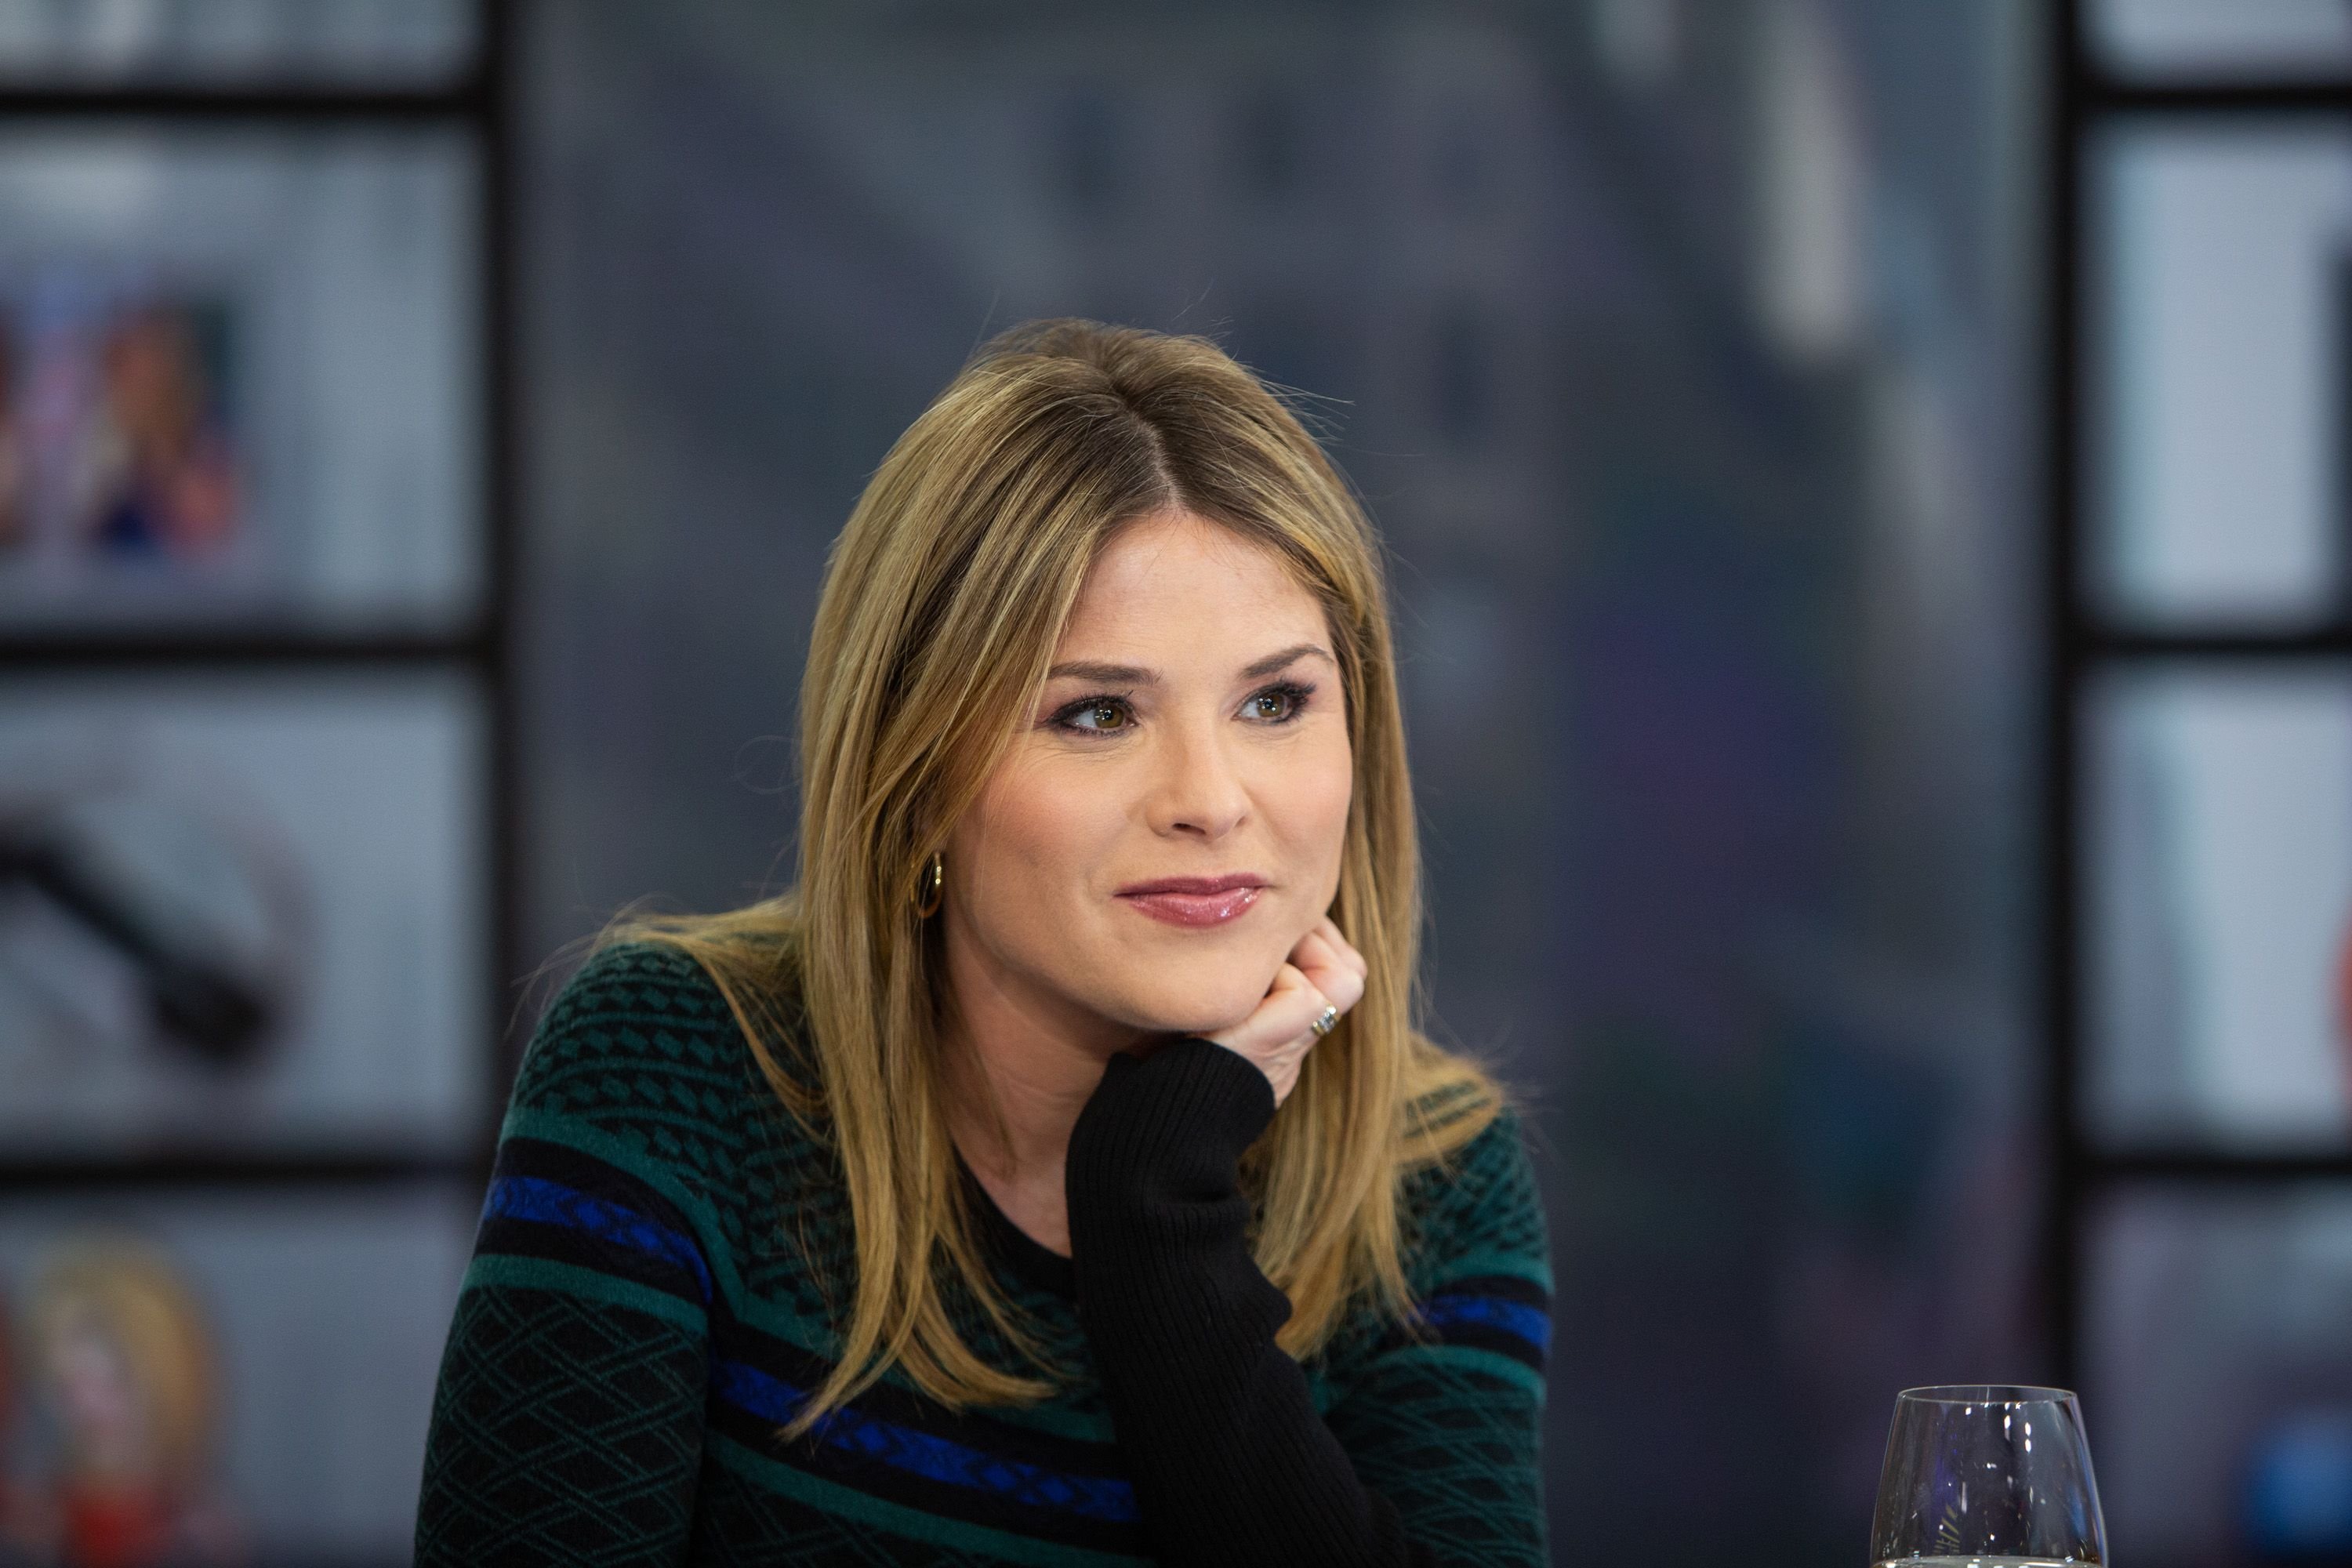 Jenna Bush Hager during an episode of the "Today" show on NBC | Photo: Nathan Congleton/NBCU Photo Bank/NBCUniversal via Getty Images